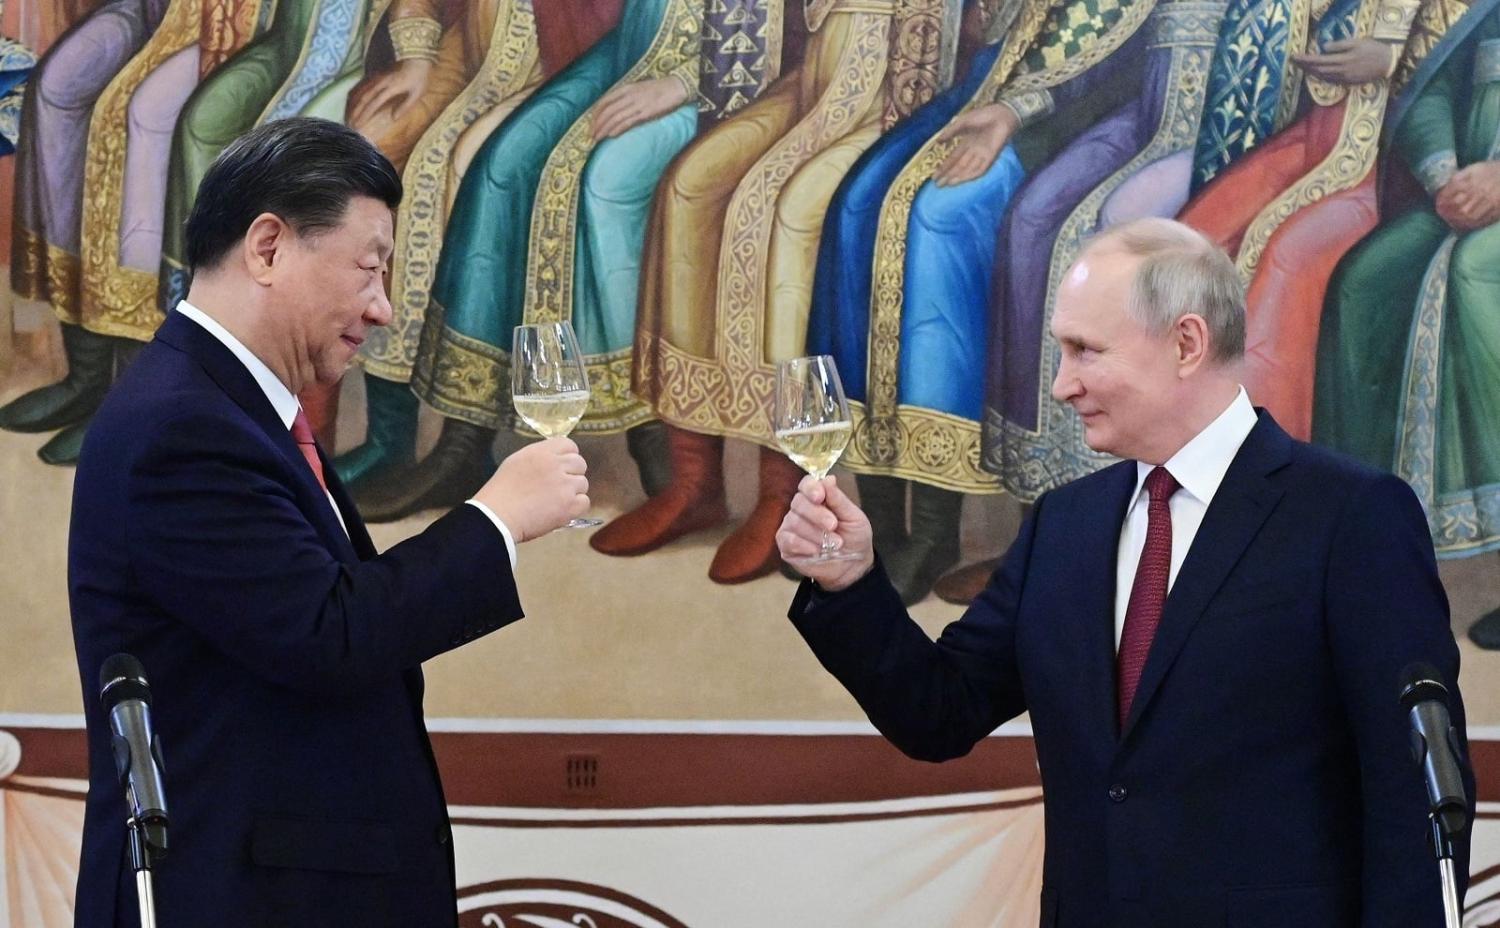 Russian President Vladimir Putin and China's President Xi Jinping make a toast during a reception at the Kremlin in Moscow on 21 March 2023 (Pavel Byrkin/Sputnik/AFP via Getty Images)